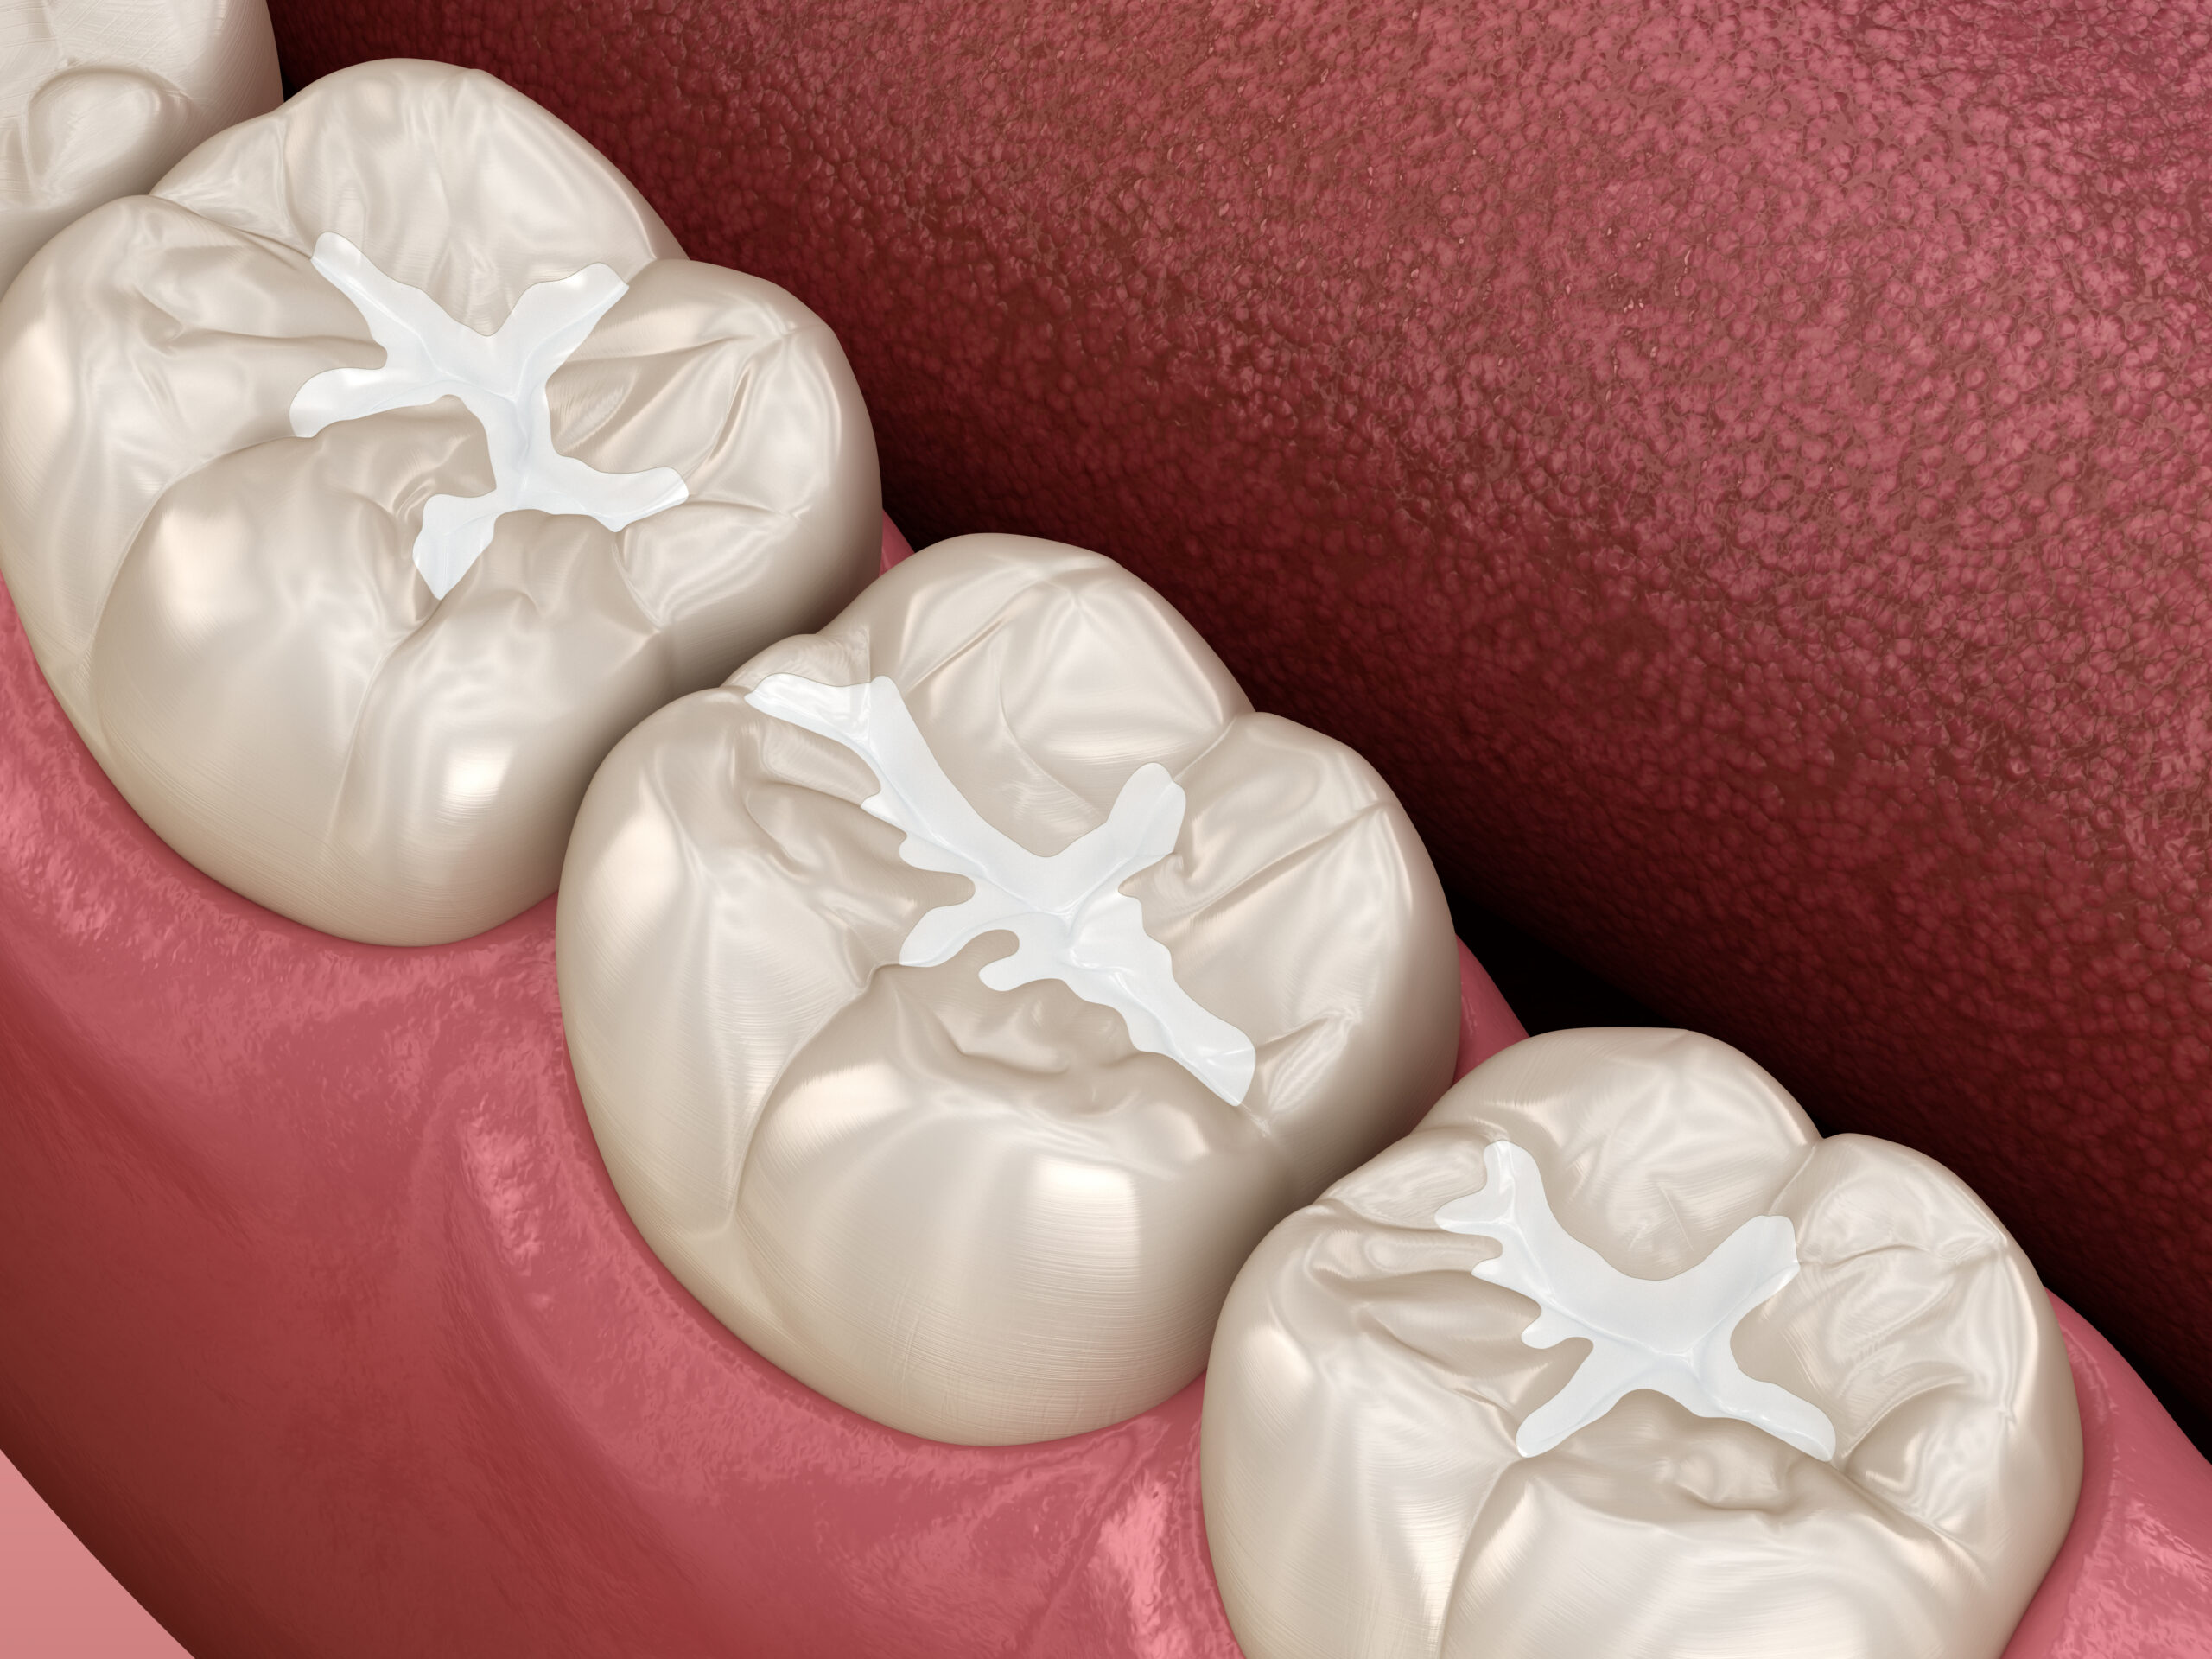 Molar Fissure dental fillings, Medically accurate 3D illustration of dental concept